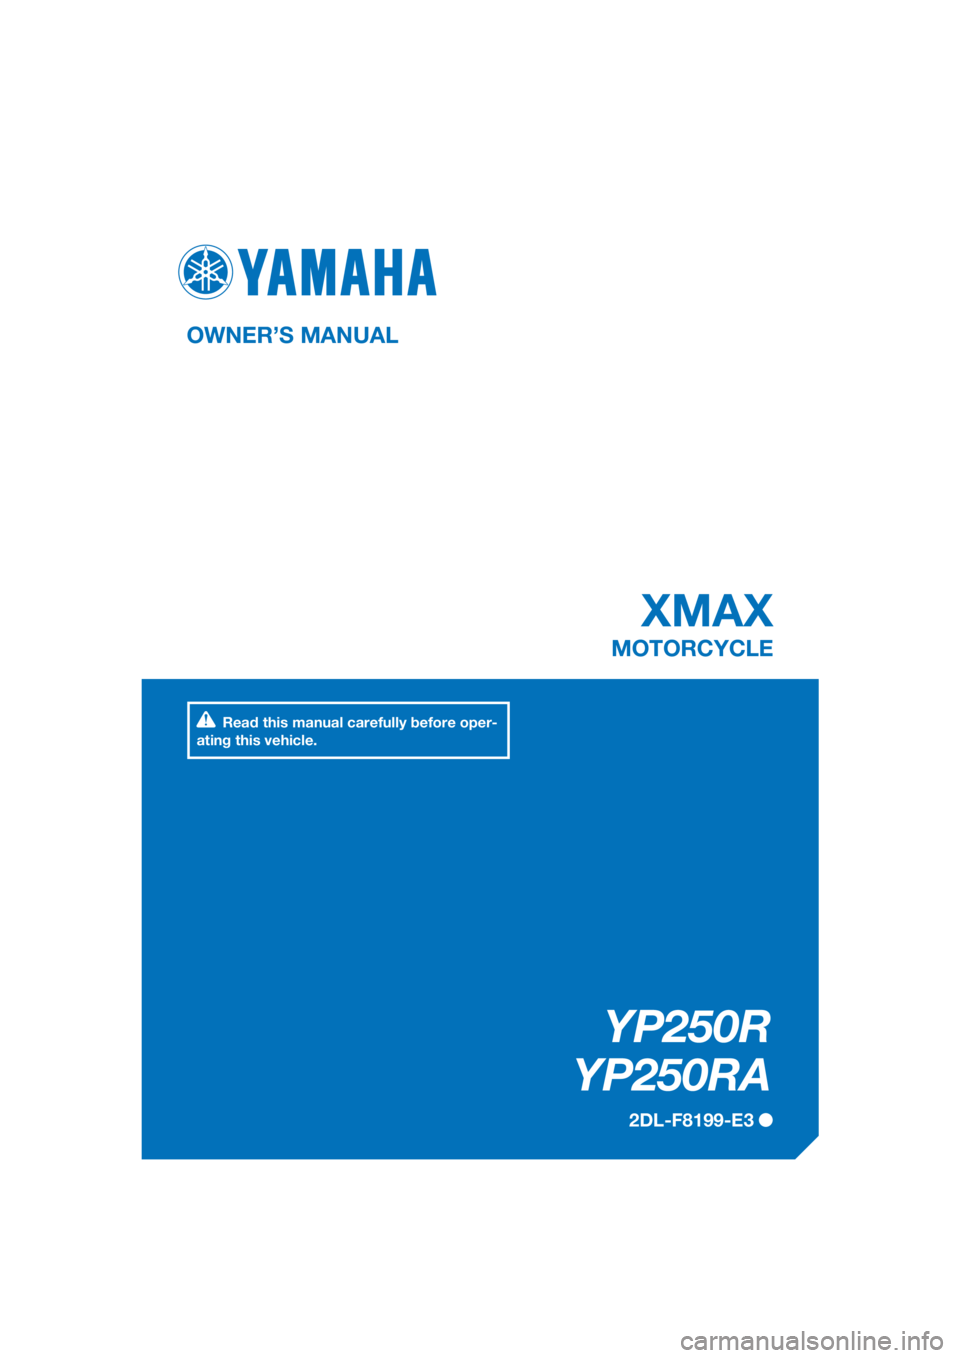 YAMAHA XMAX 250 2016  Owners Manual PANTONE285C
YP250R
YP250RA
XMAX
OWNER’S MANUAL
2DL-F8199-E3
MOTORCYCLE
[English  (E)]
Read this manual carefully before oper-
ating this vehicle. 